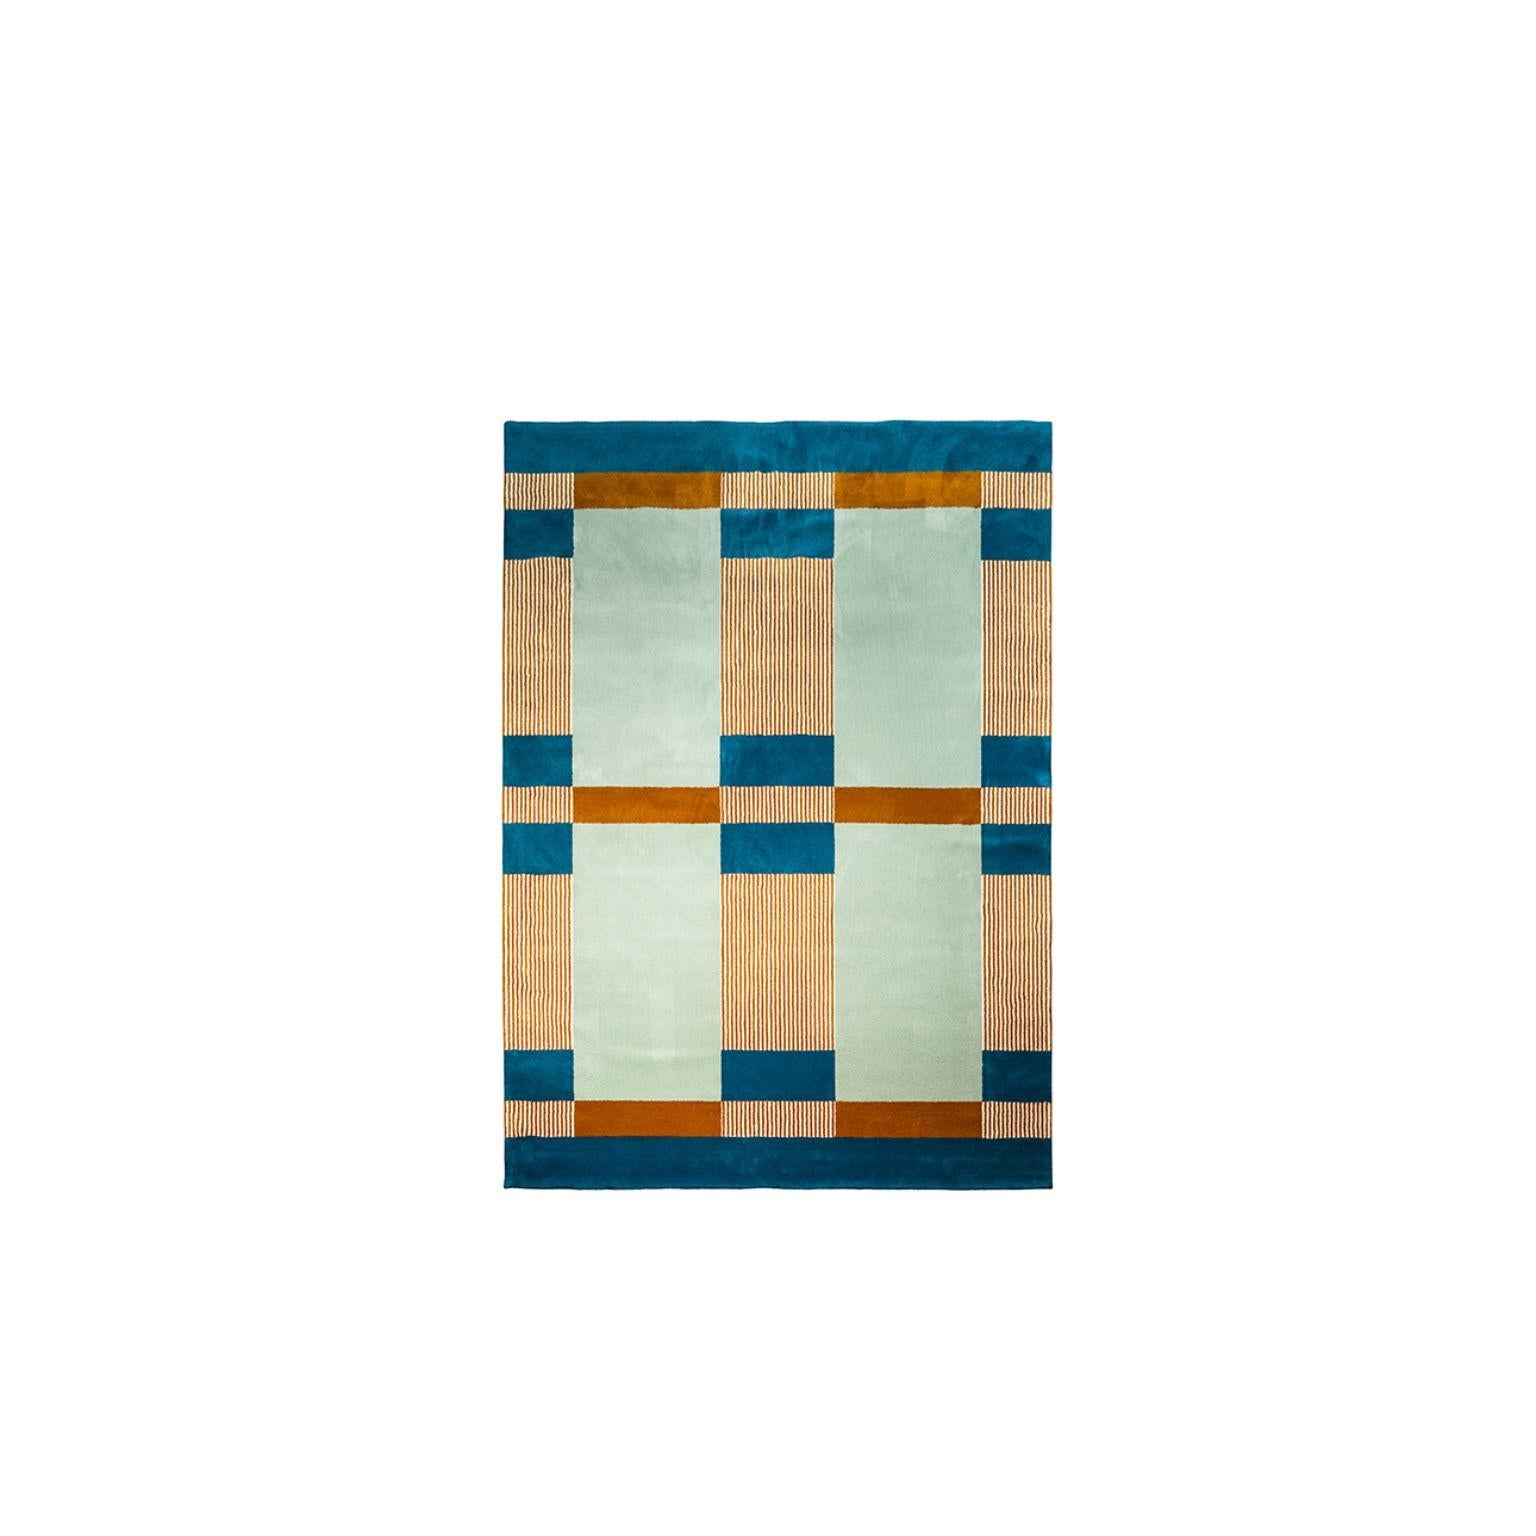 Playtime rug Mikado by Emma Boomkamp
Materials: W 400 x D 300 cm
Dimensions: Wool hand knotted or tufted version



Emma Boomkamp’s Playtime rug collection is inspired by the childhood. A nod to the playground, the first place where we